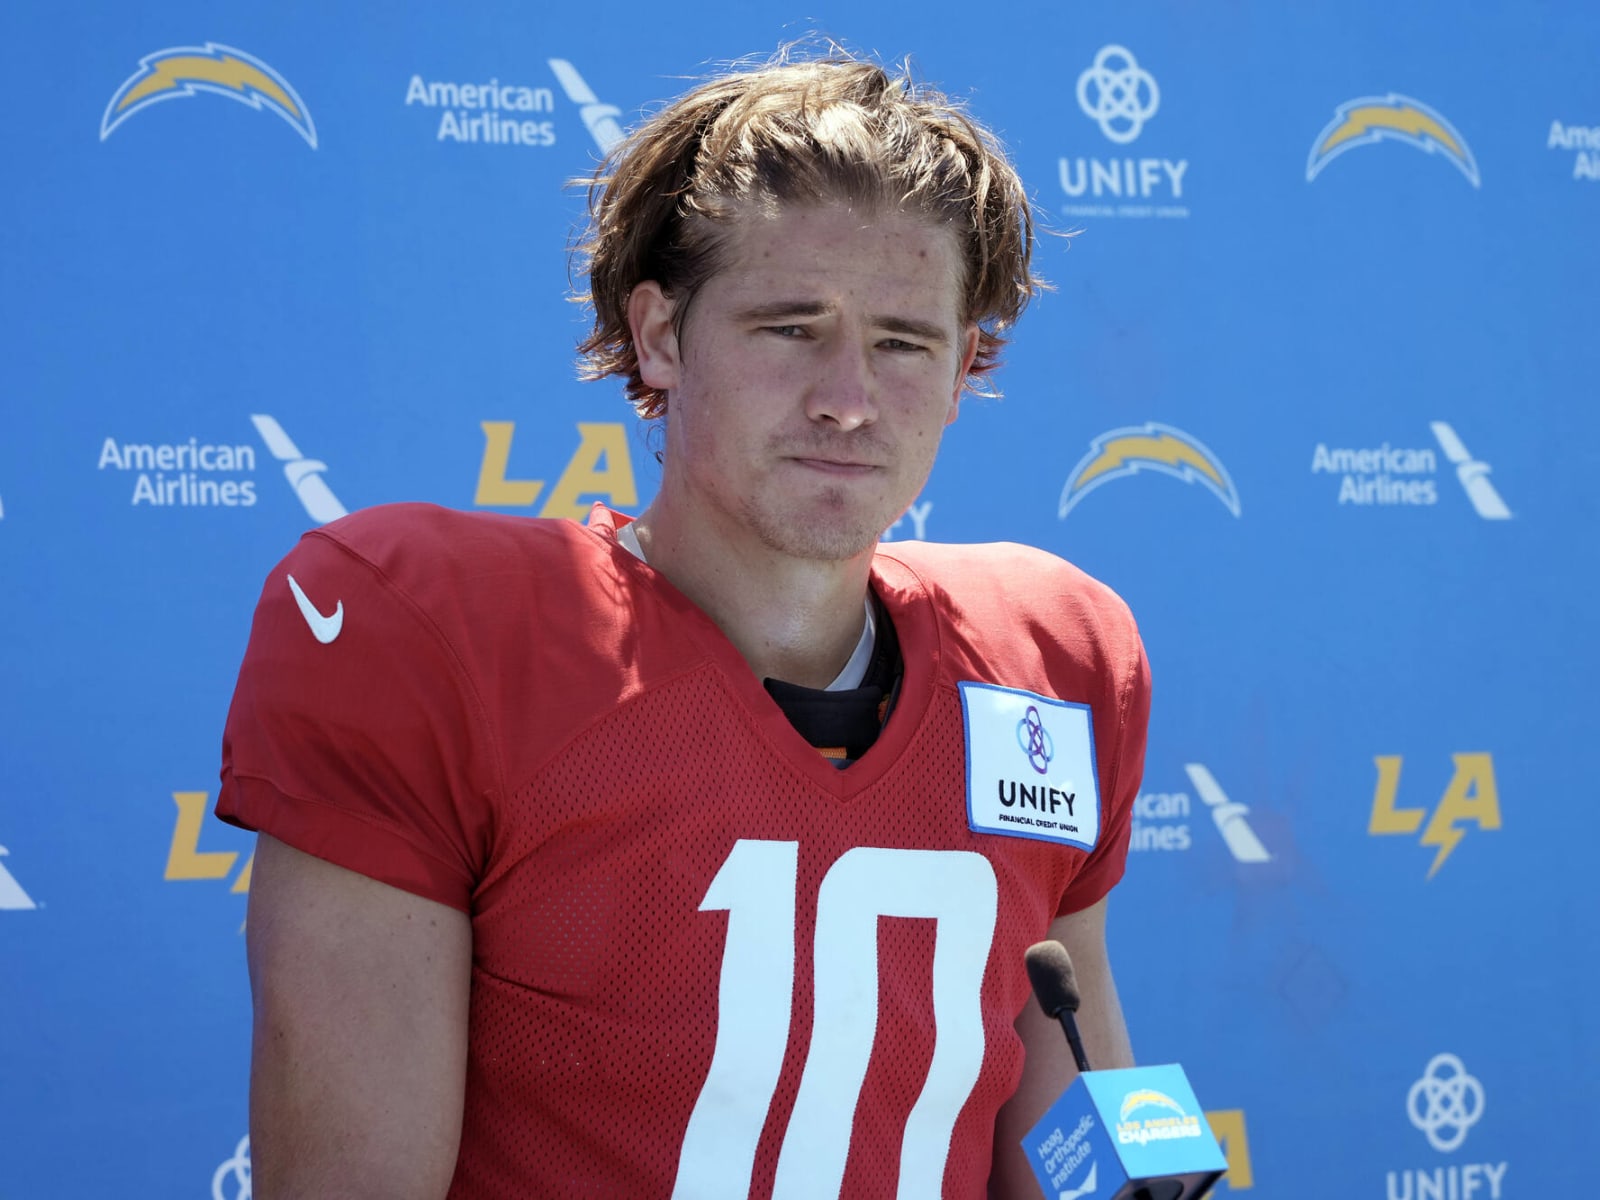 Chargers star QB Justin Herbert is tough, steady and ready for his playoff  debut - The Athletic